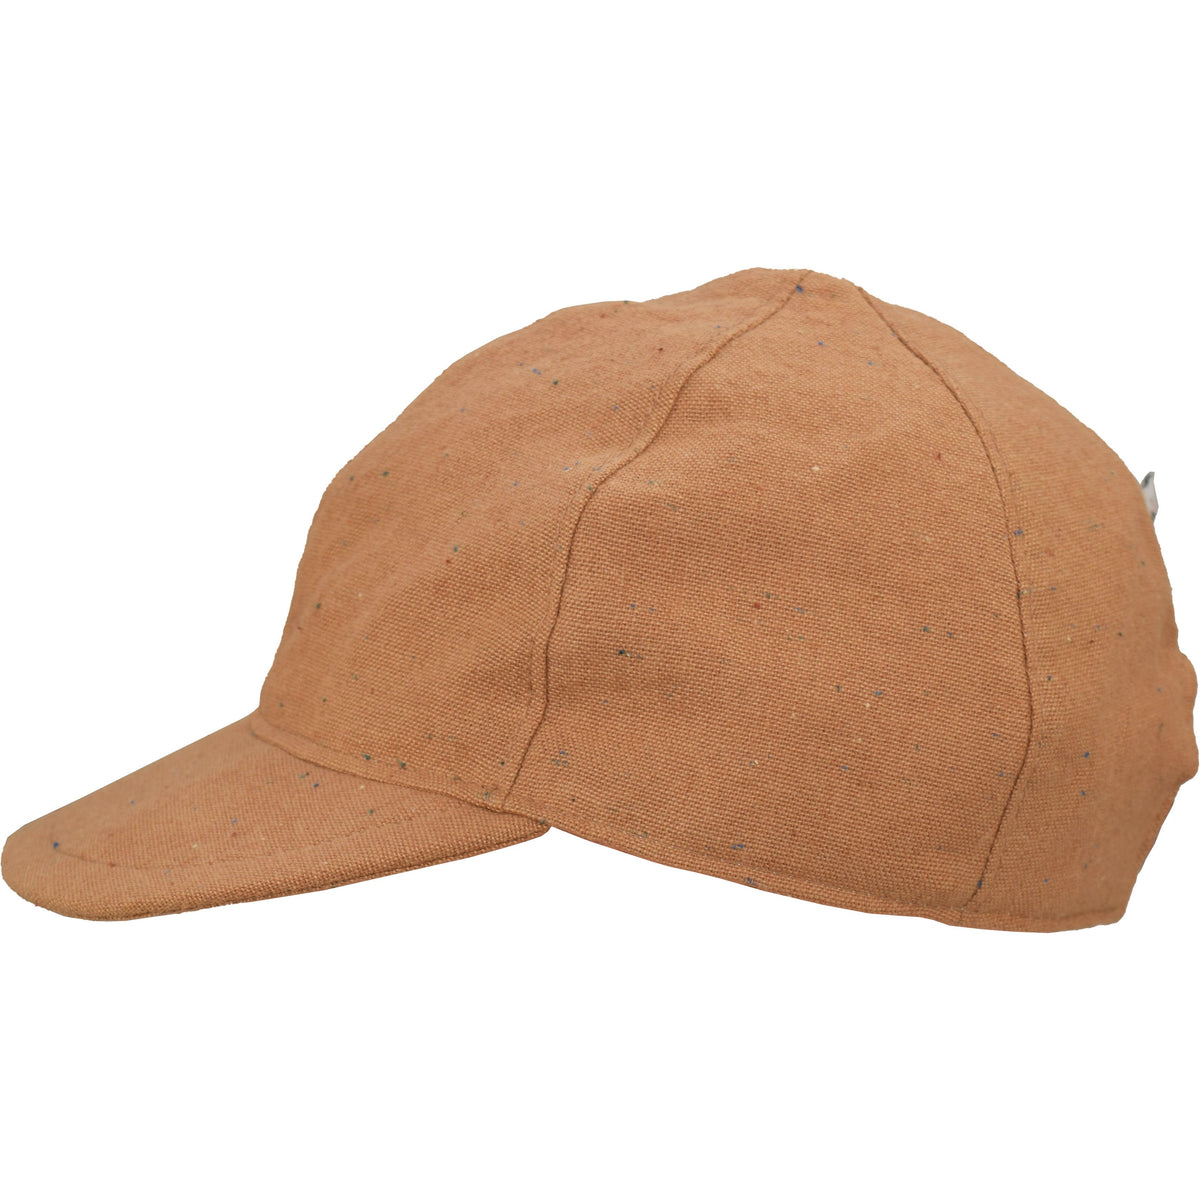 Adorable toddler and child ball cap for back to school-upf50+ rating-linen canvas-machine washable-Made in Canada by puffin Gear-Butterscotch Sprinkles